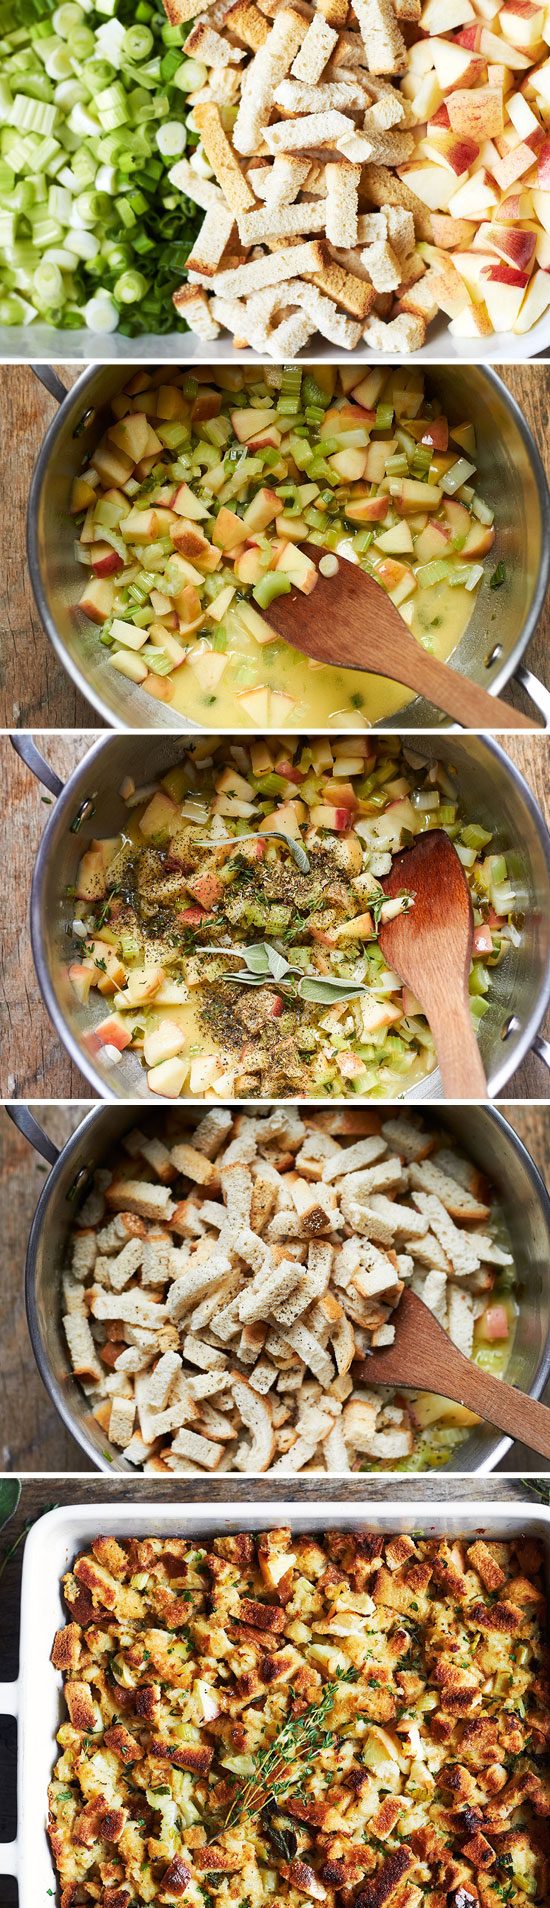 Thanksgiving Apple Sage Stuffing - #thanksgiving #recipe #eatwell101 - Crisp and moist - Your guests will literally stuff themselves.